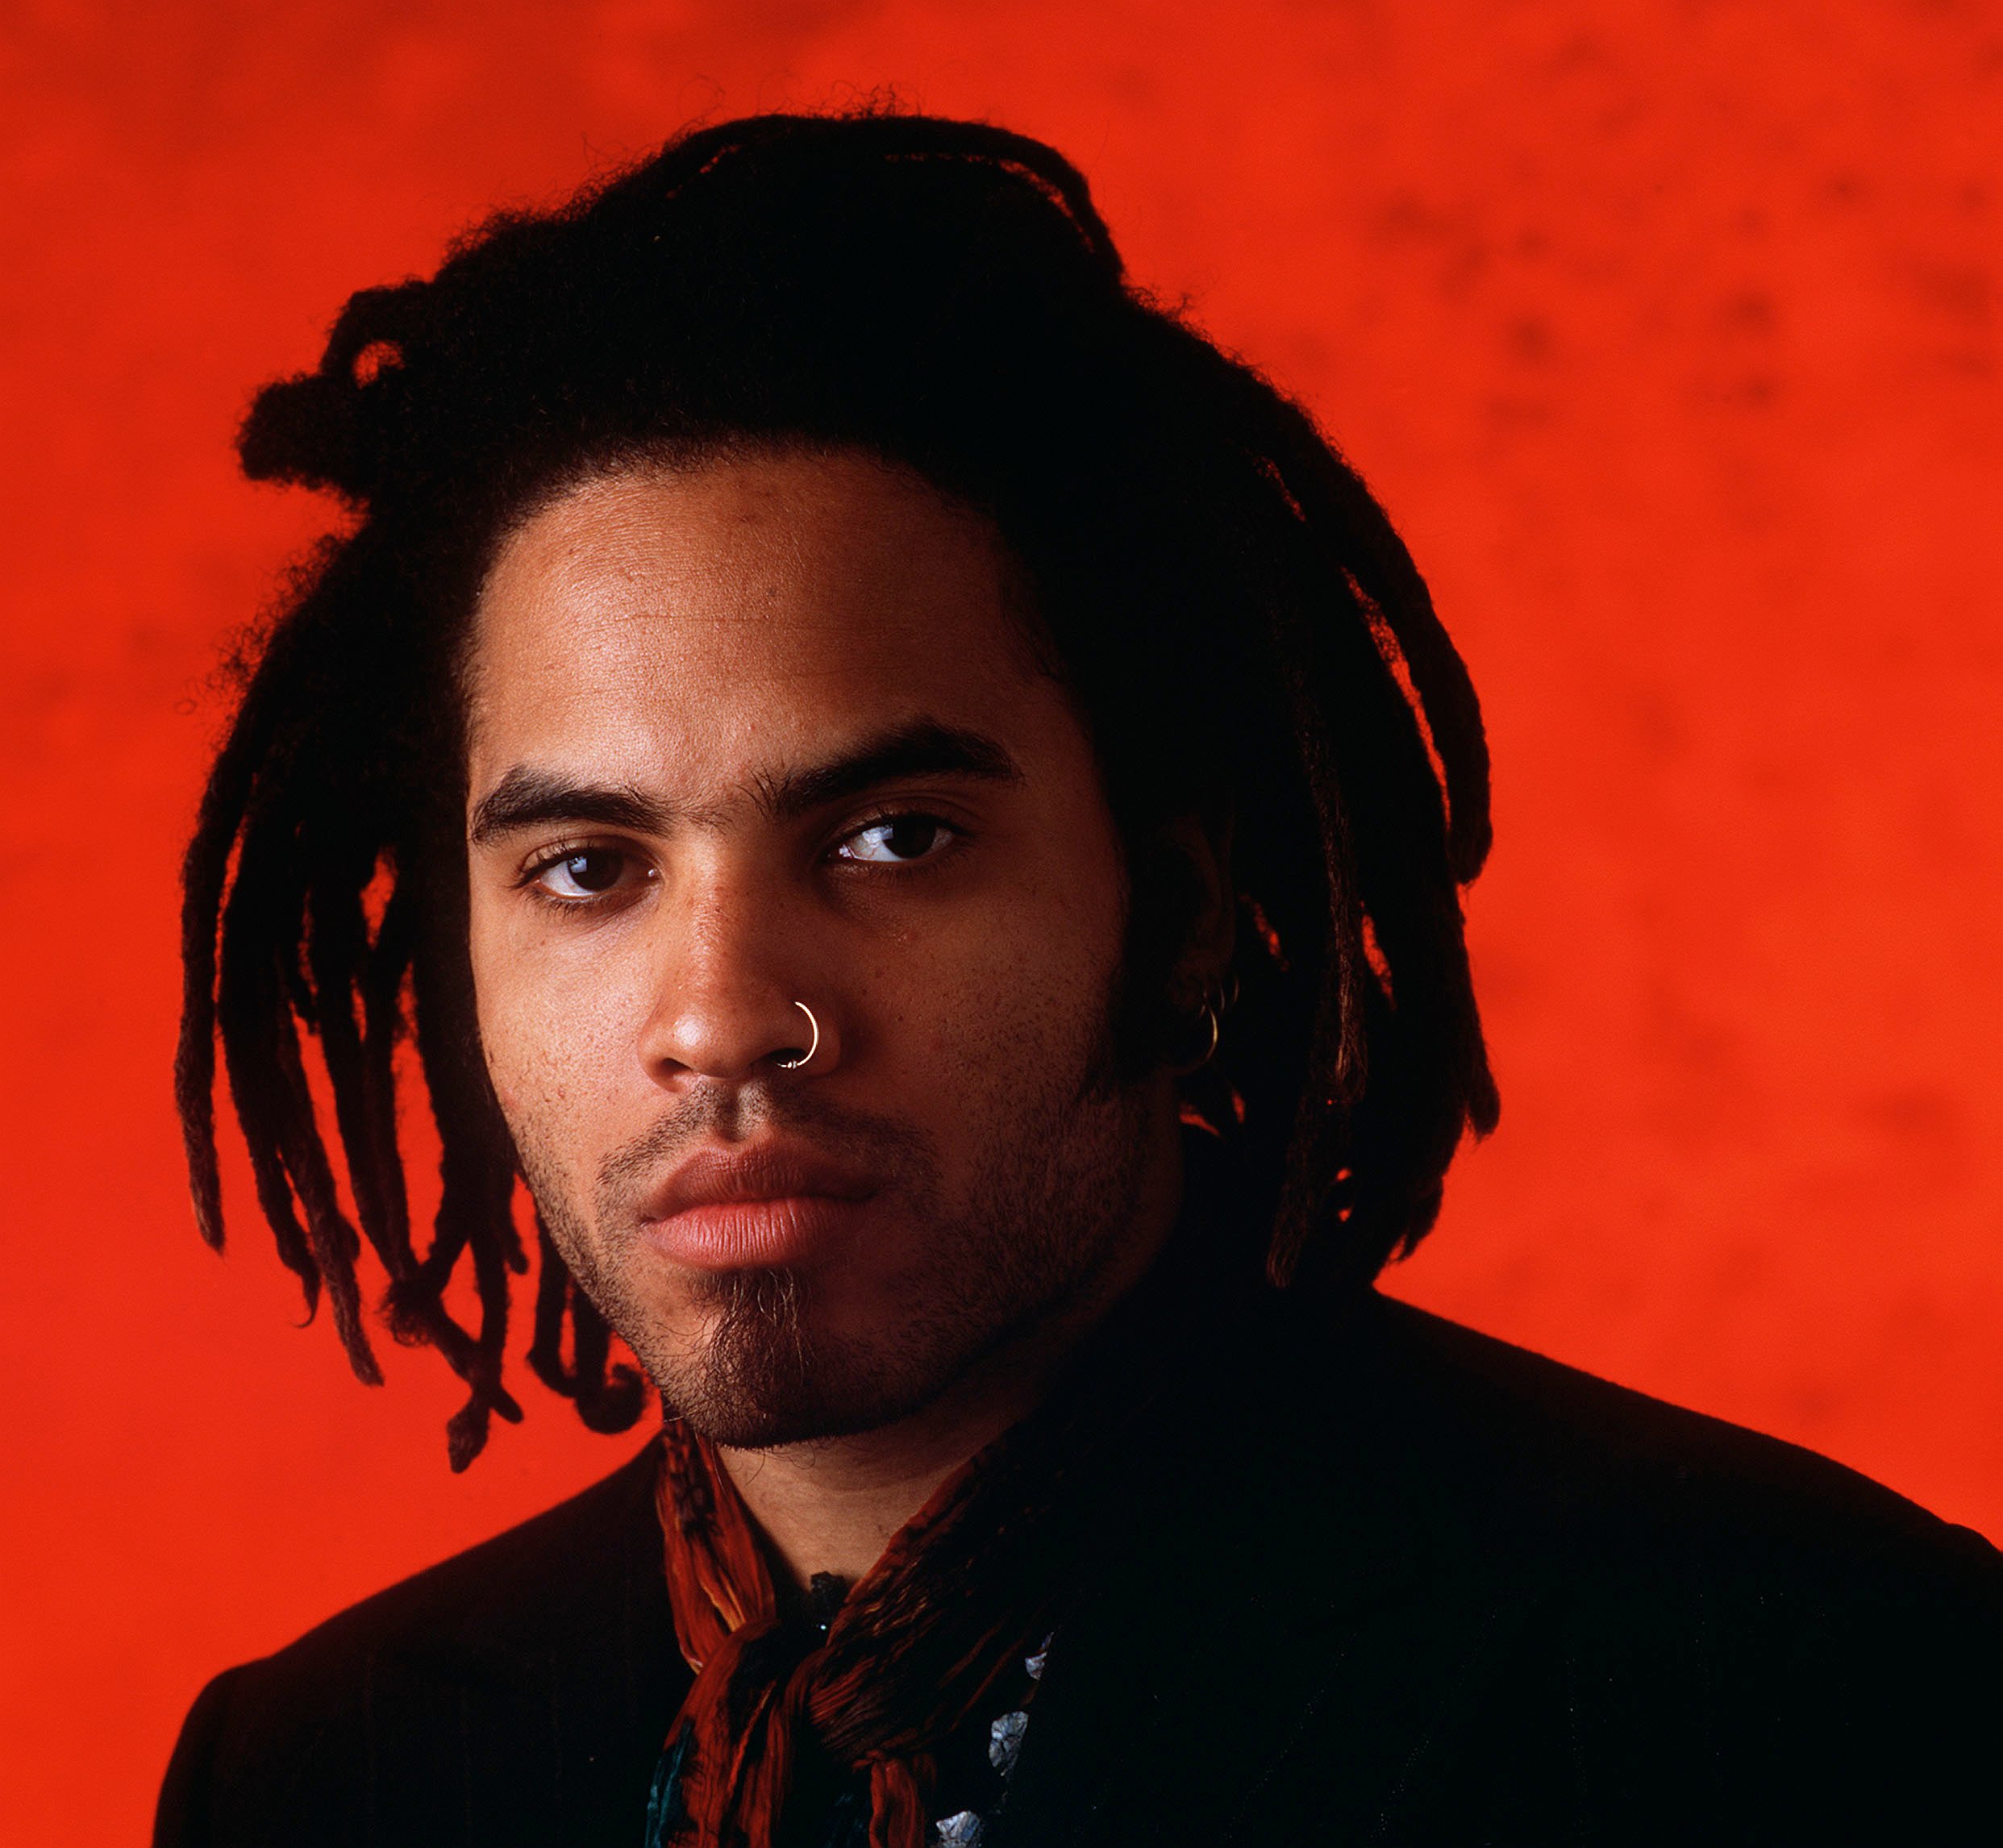 Lenny Kravitz with a nose ring